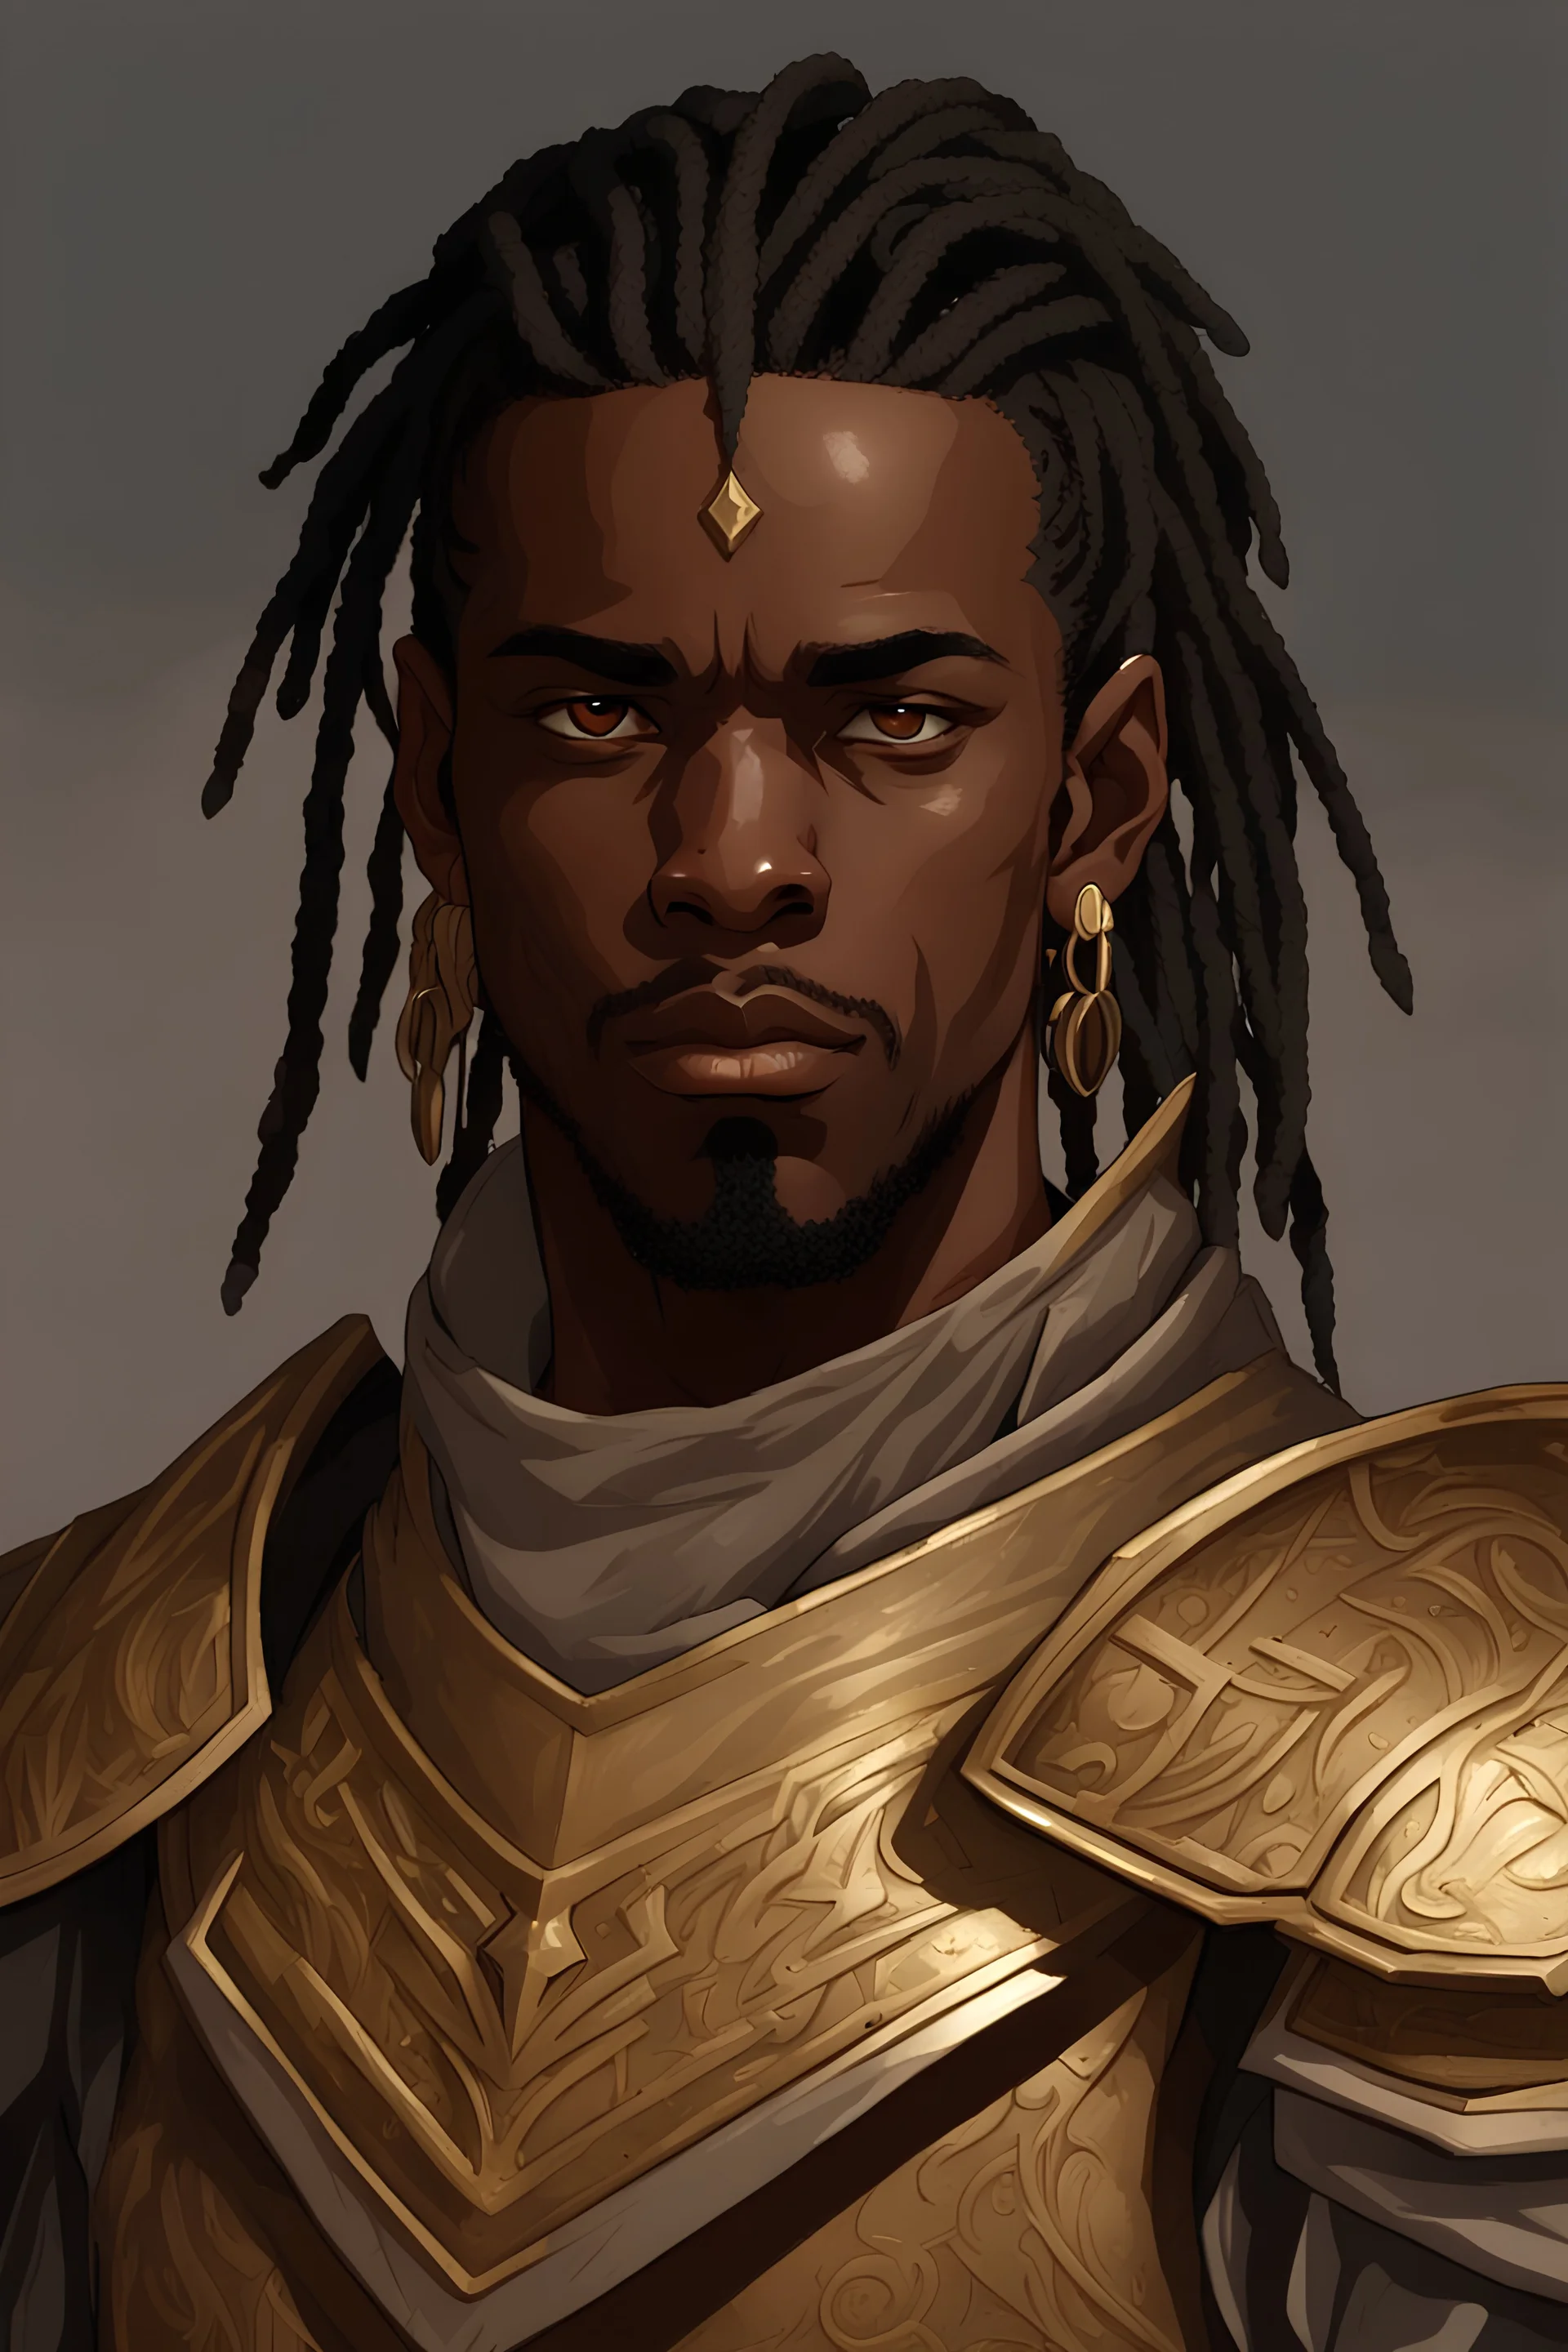 25 years old black man, golden color eyes, black short dreads, d&d cleric of sun, cleric of Lathander, wears lamellar plate armor, has various earrings on his ears, have off-white clothes under the armor